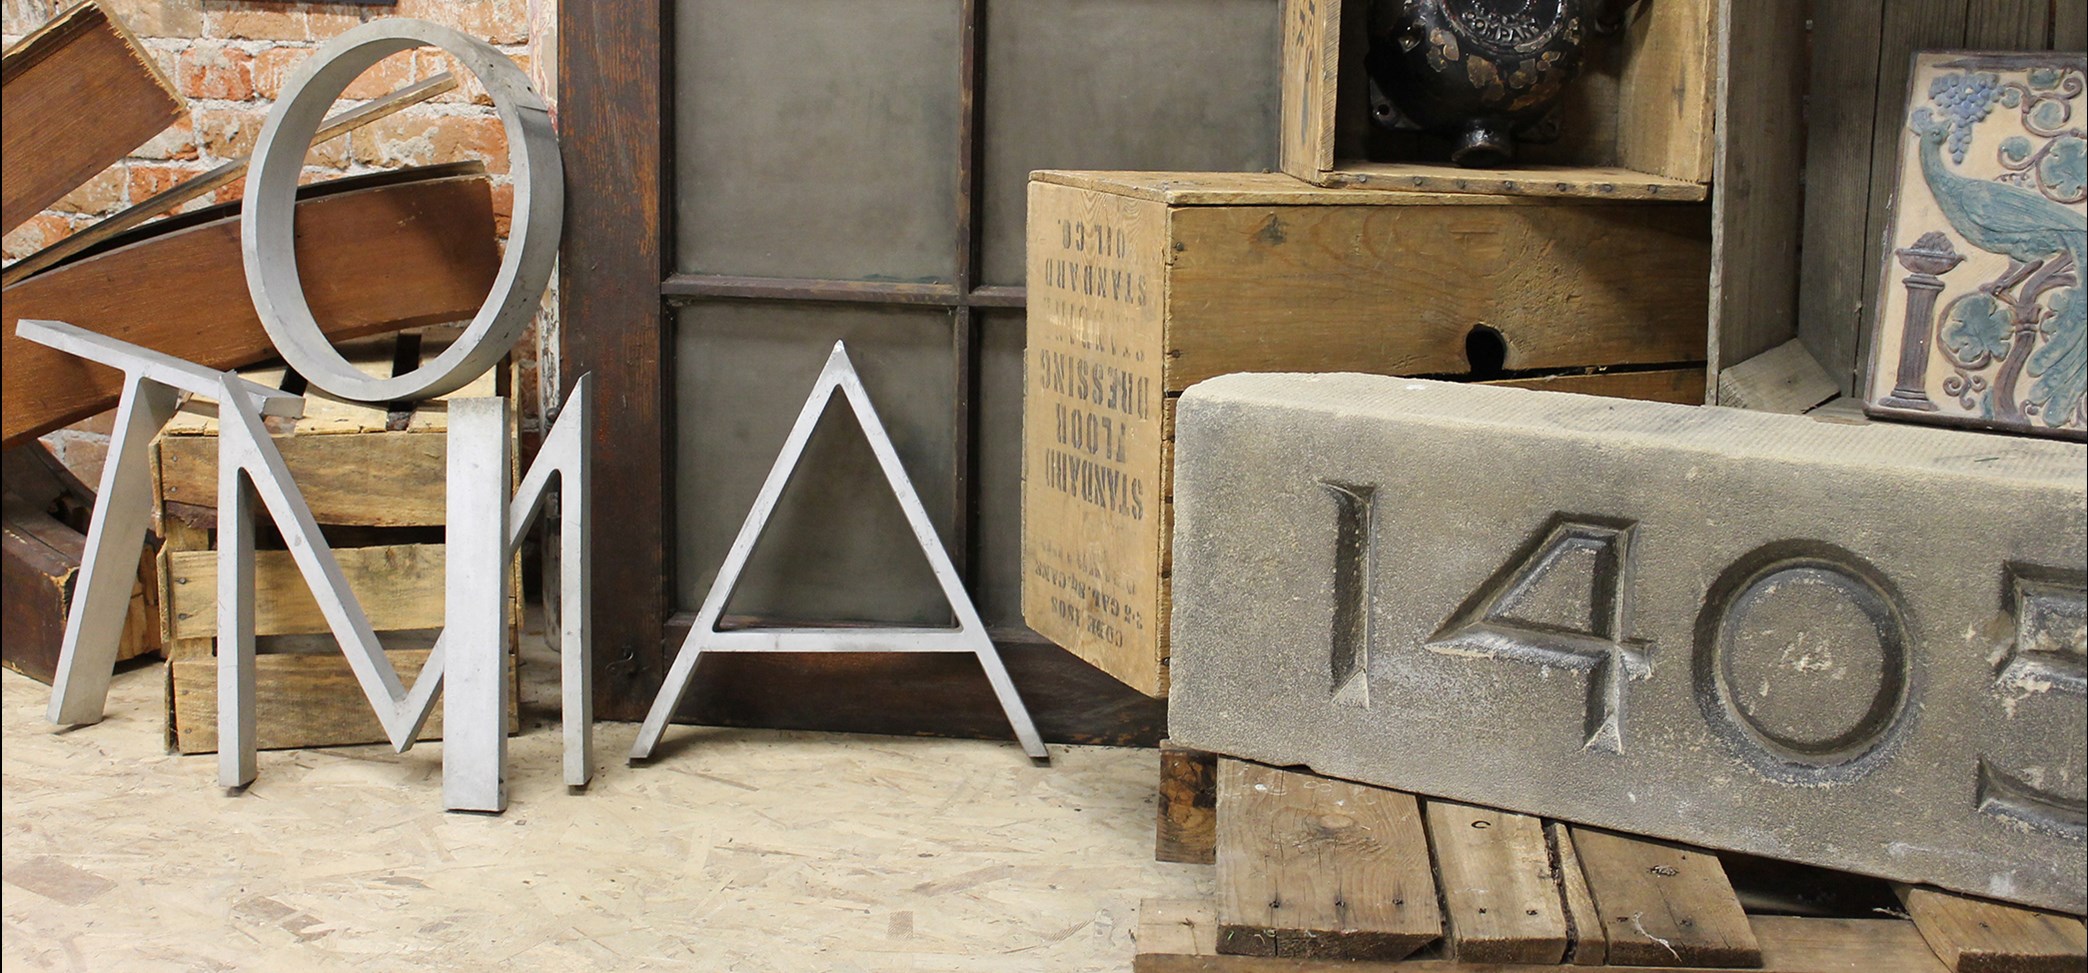 Header image of crates, bricks, and large metal letters